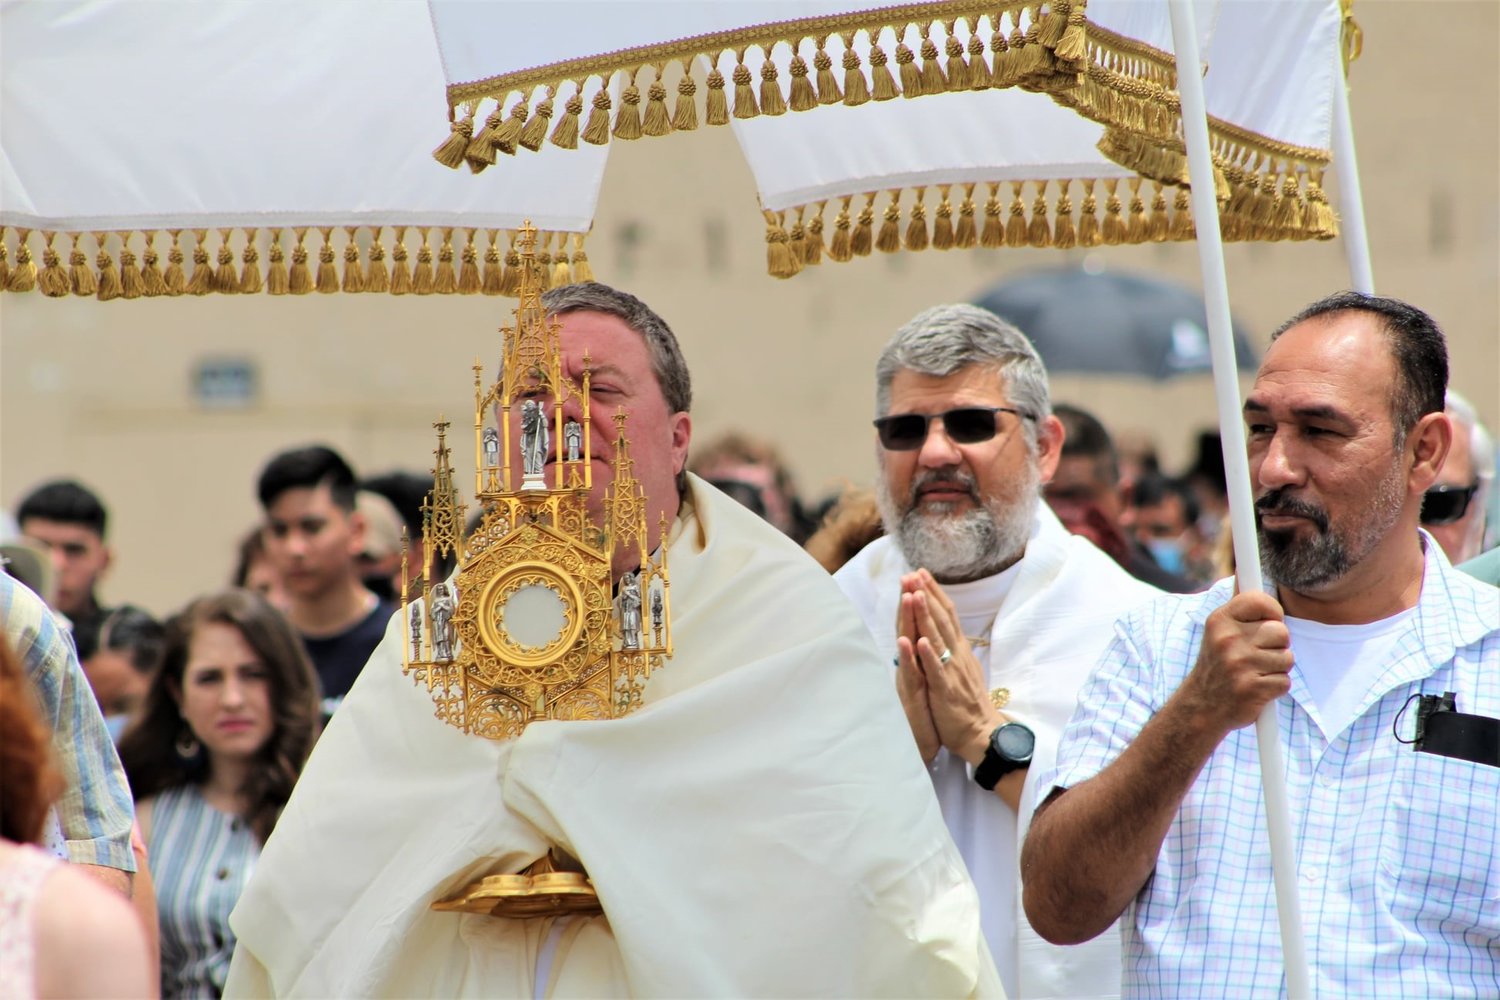 Father Joseph Corel, followed by Father David Veit, carries the Most Blessed Sacrament in procession on a past year's Solemnity of the Most Holy Body and Blood of Christ (Corpus Christi) in Sedalia.